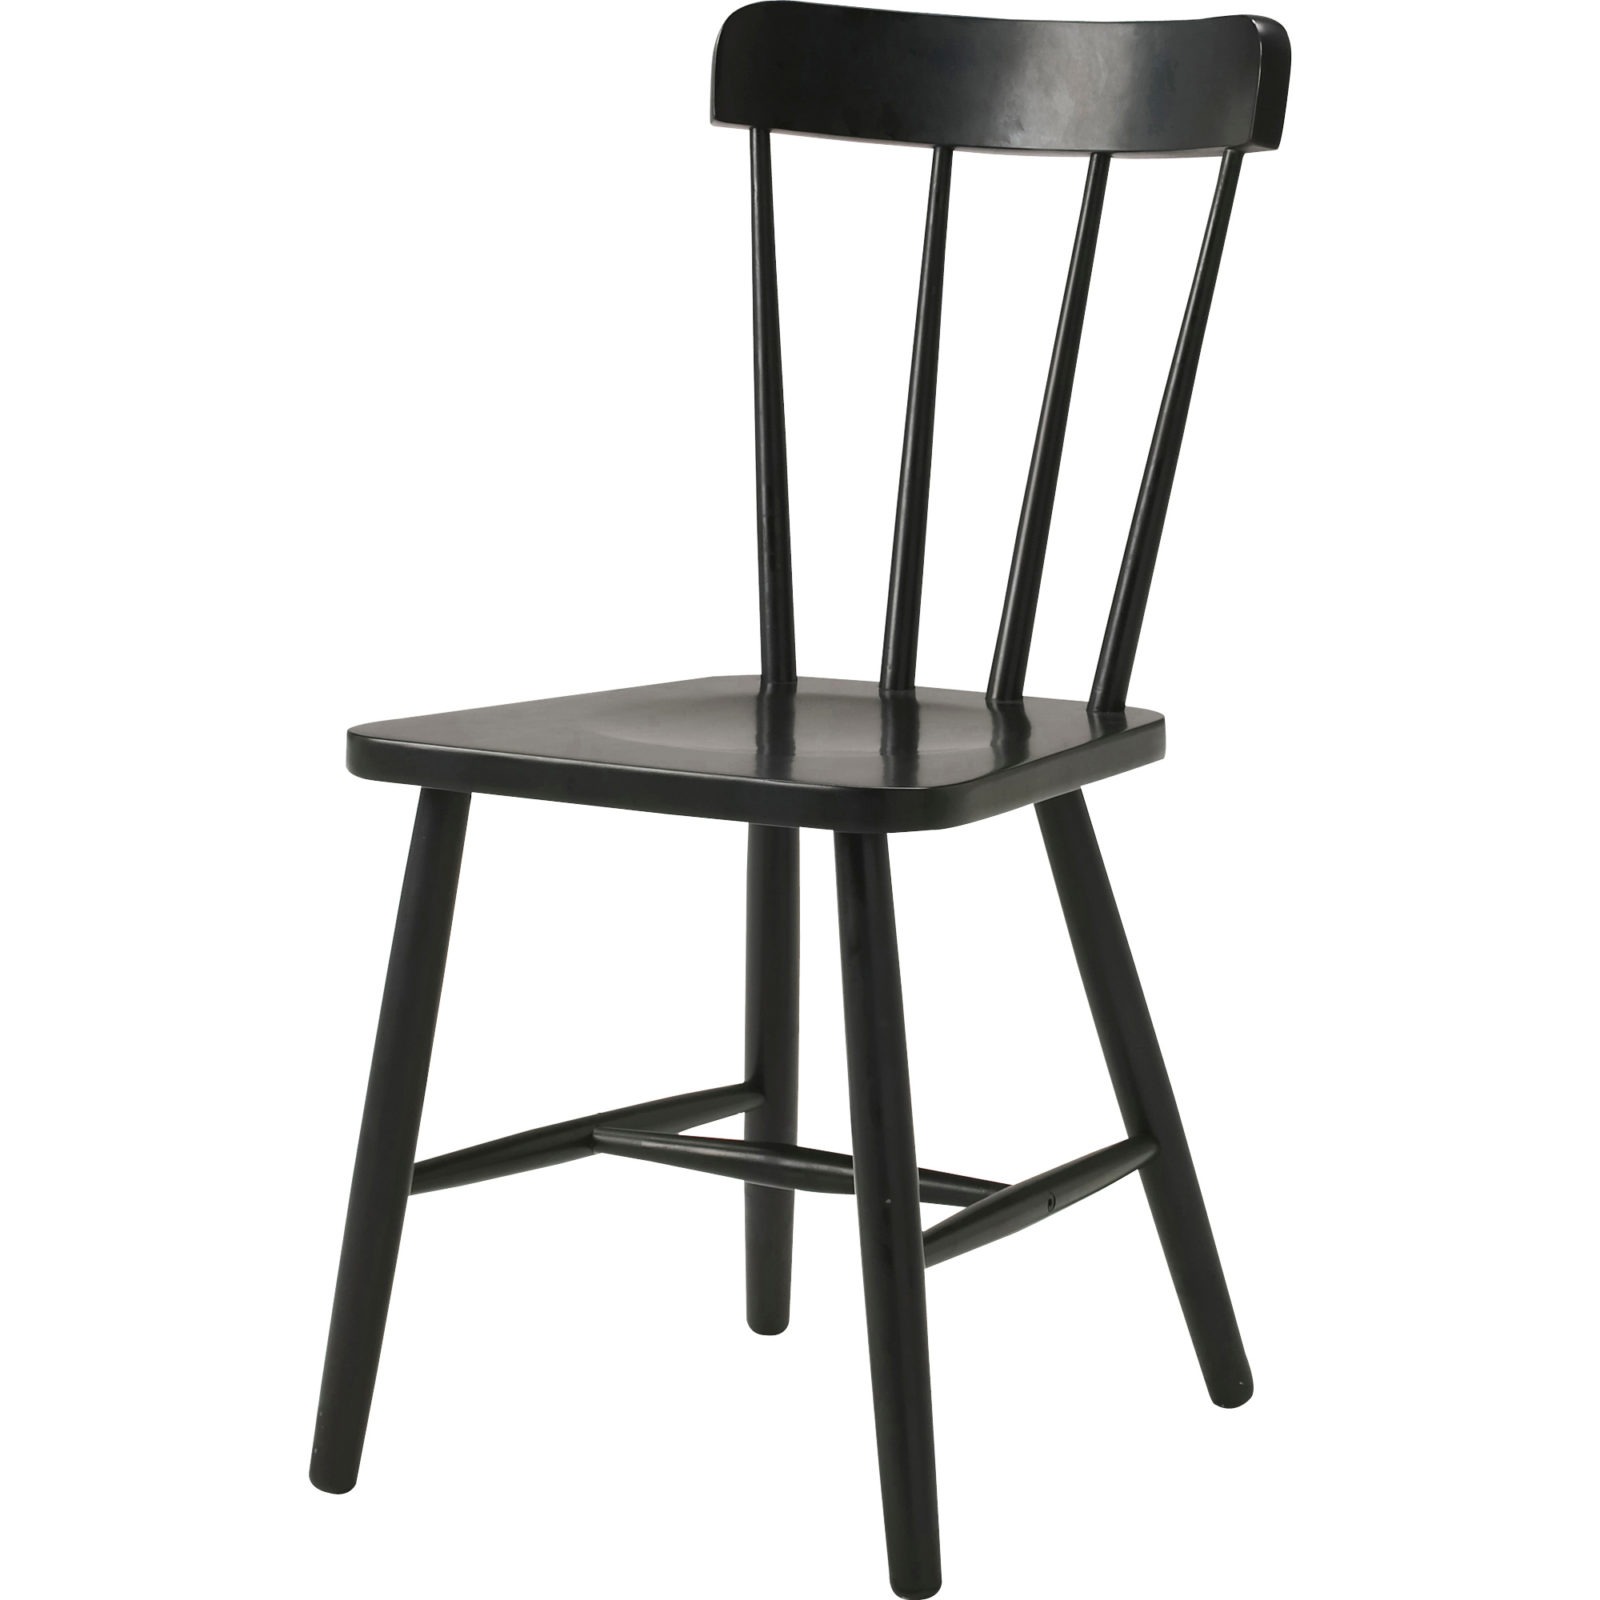 Black pin-back chair with four pins or ‘spindles’ in the backrest, OLLE.